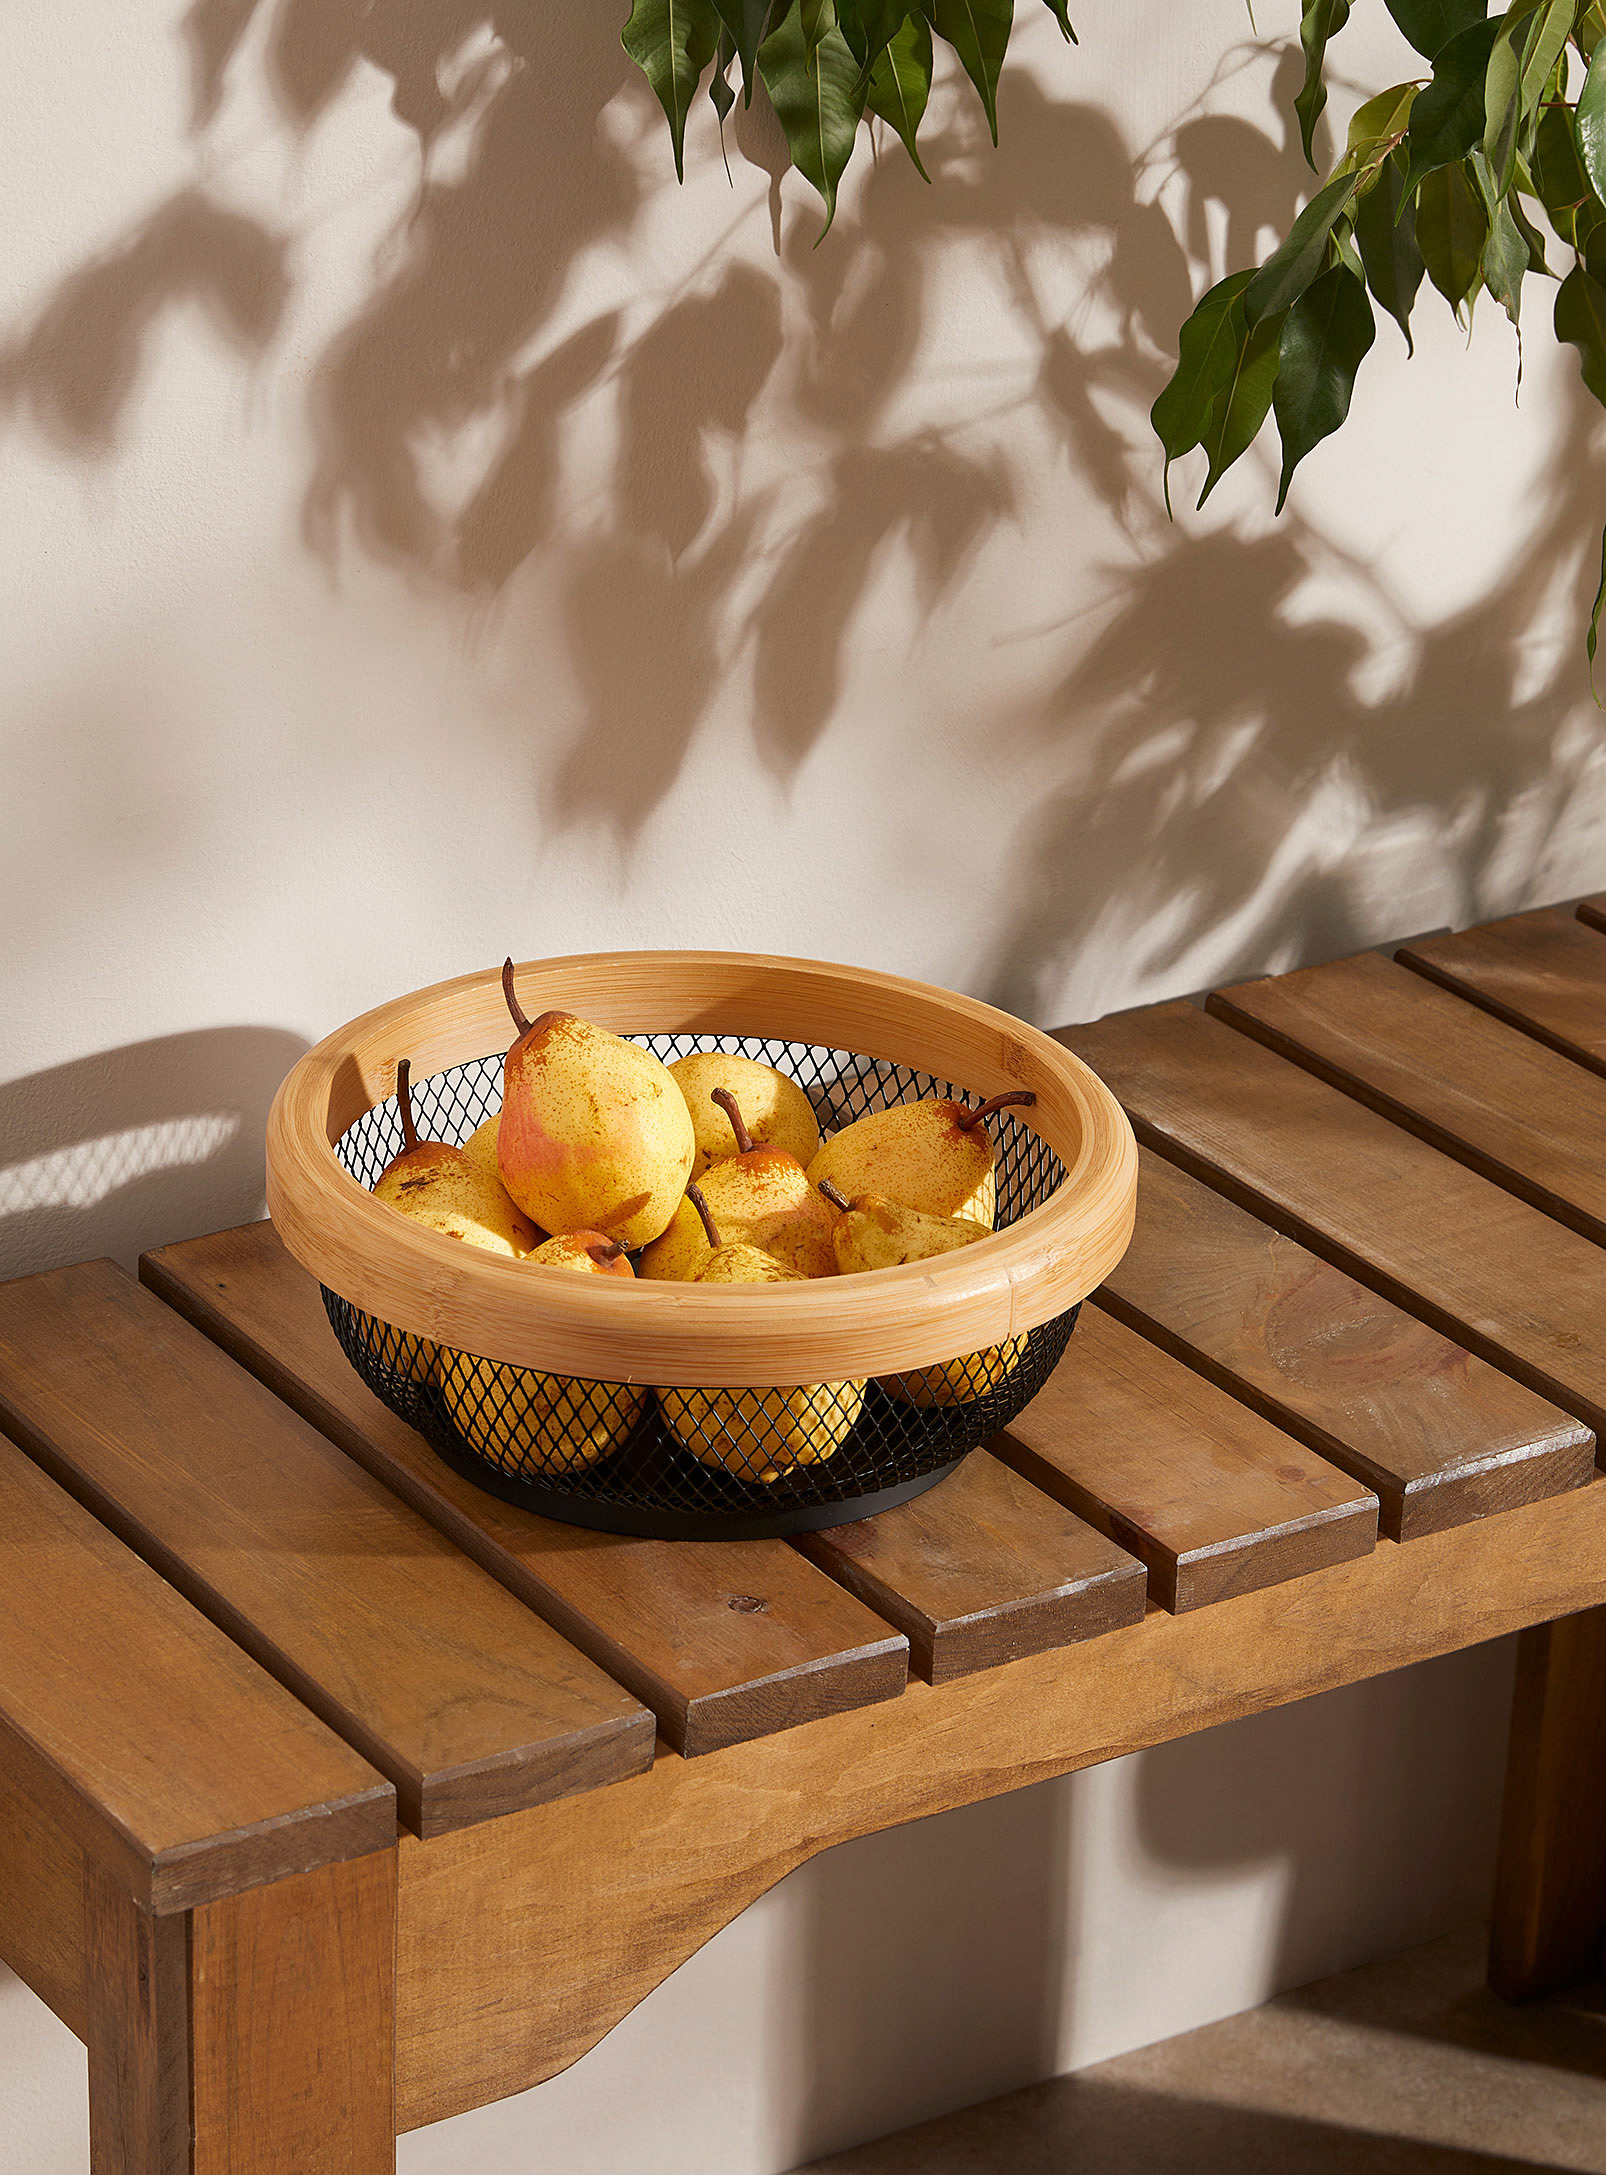 Simons Maison Wood Trim And Mesh Fruit Bowl In Blue